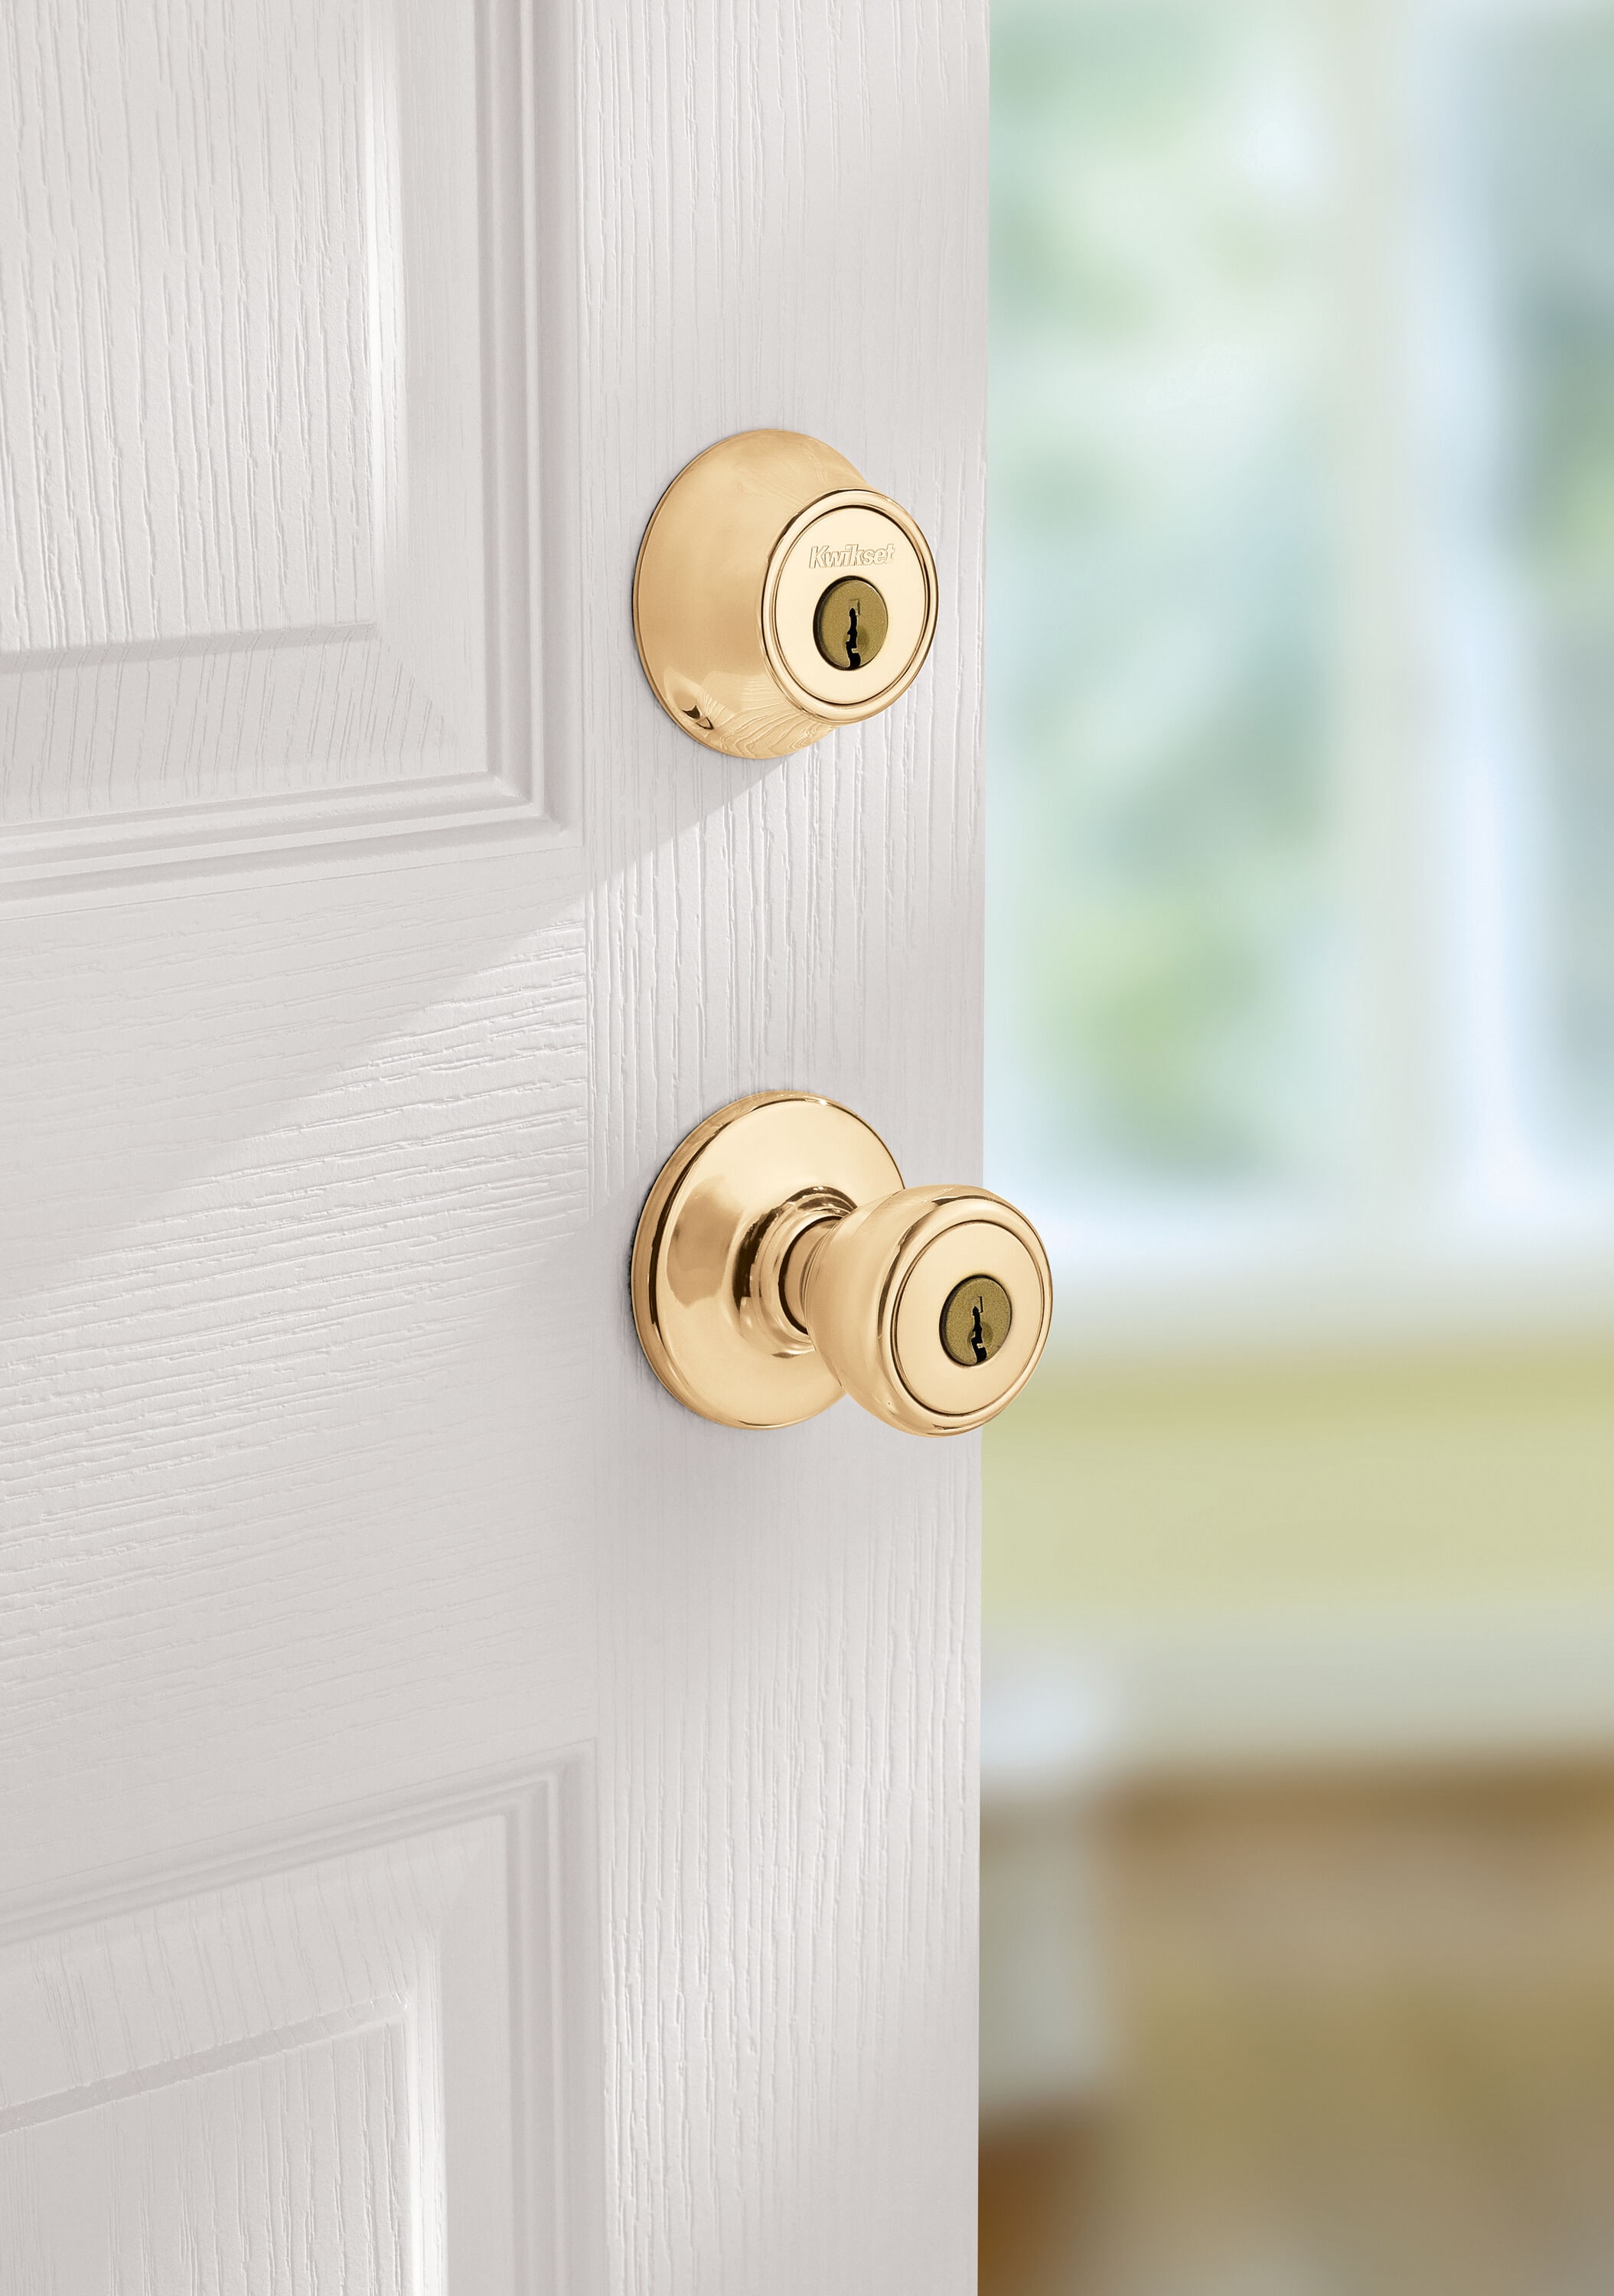 Kwikset 242 Tylo Entry Knob and Single Cylinder Deadbolt Project Pack in Antique Brass by Kwikset - 4